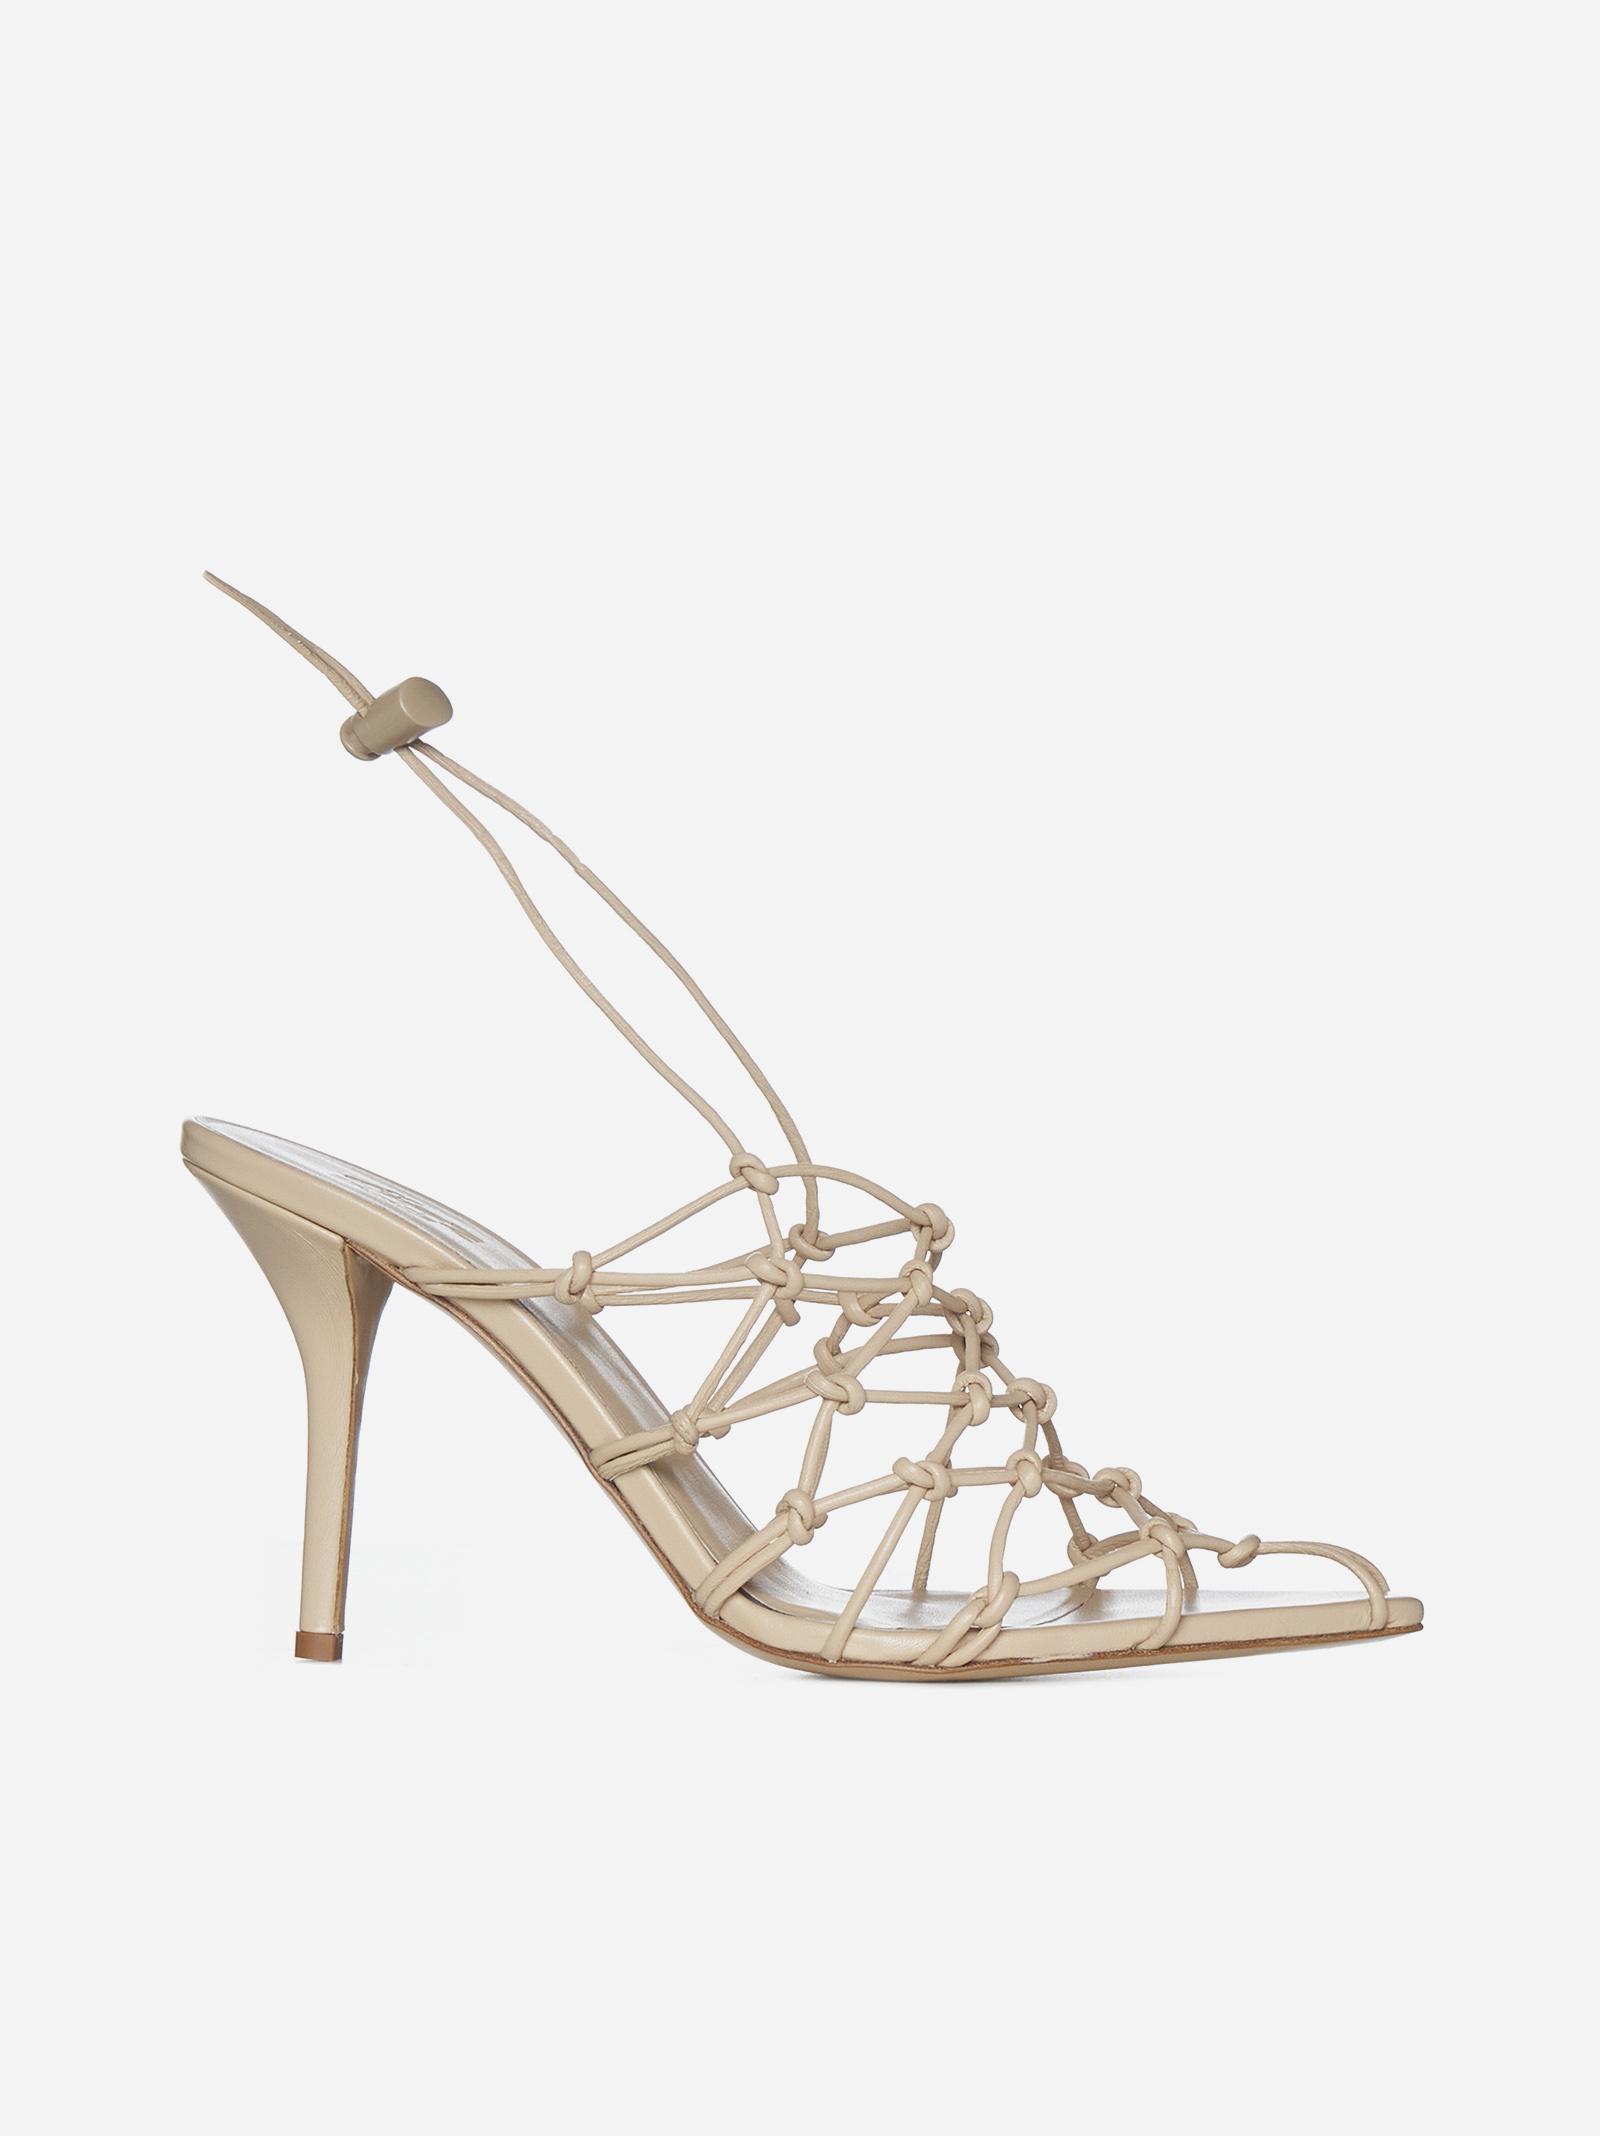 Gia Borghini Woven Faux Leather Sandals in Natural | Lyst